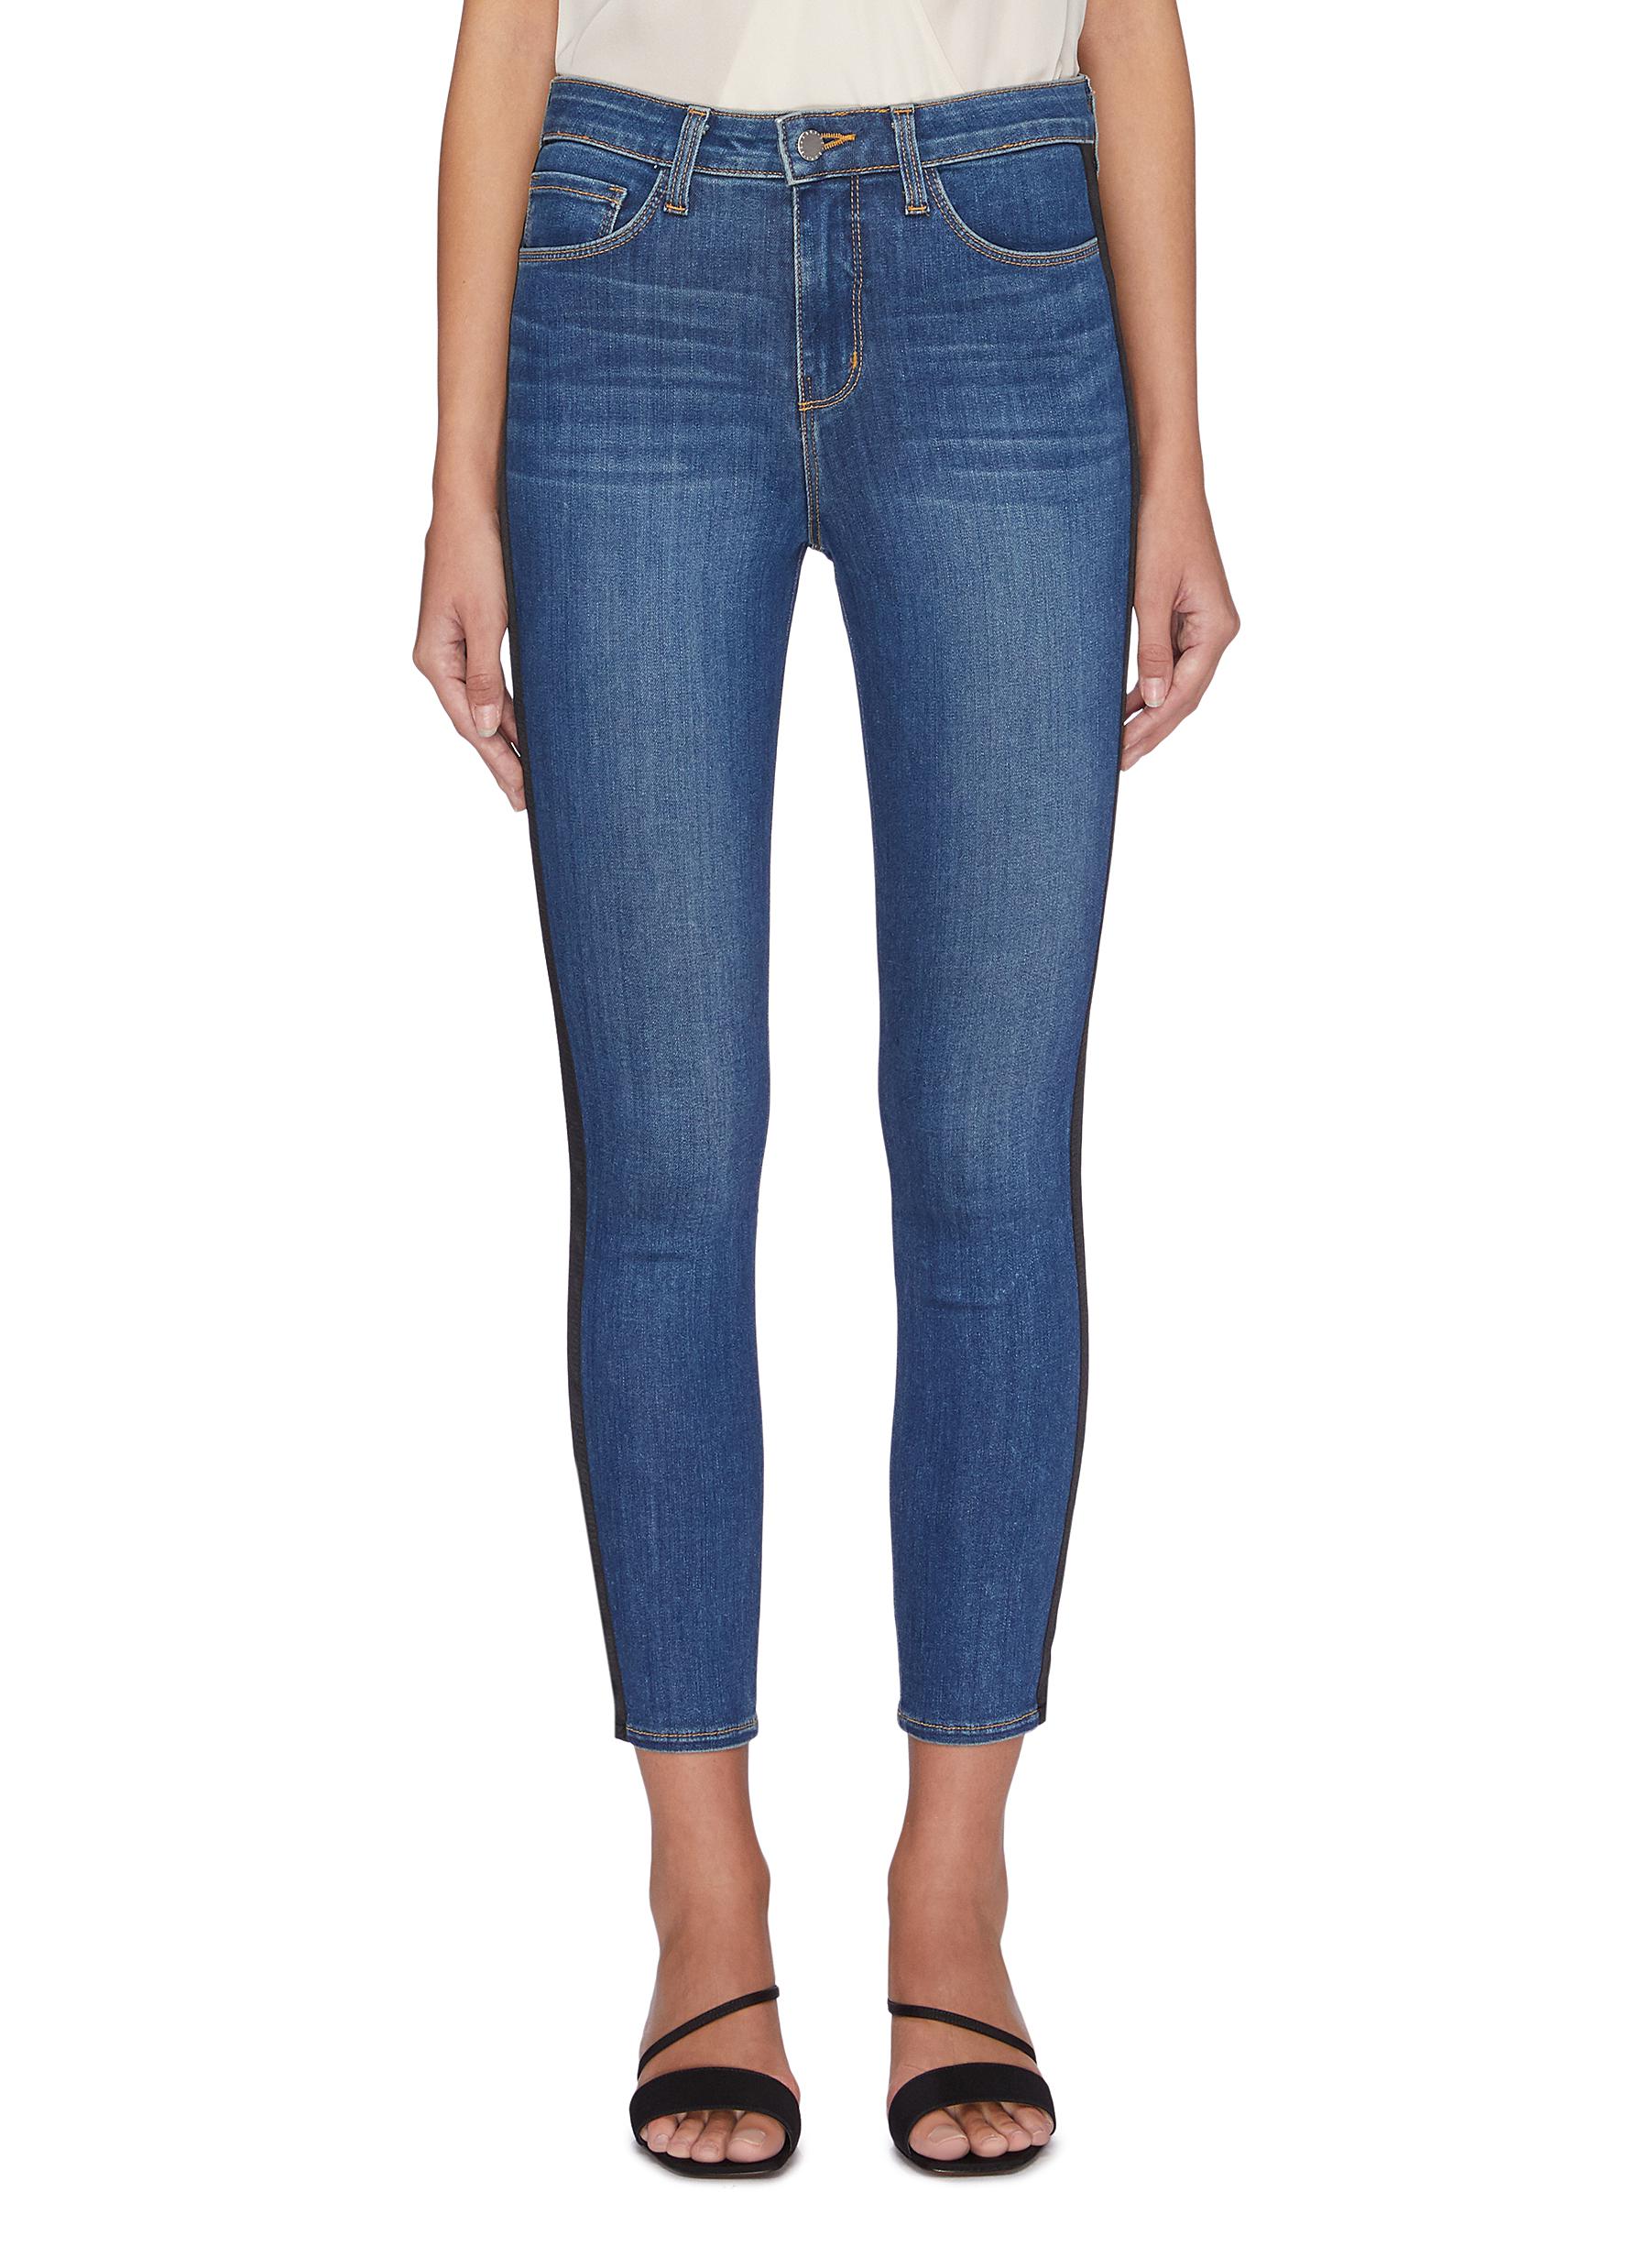 Margot stripe outseam skinny jeans by L’Agence